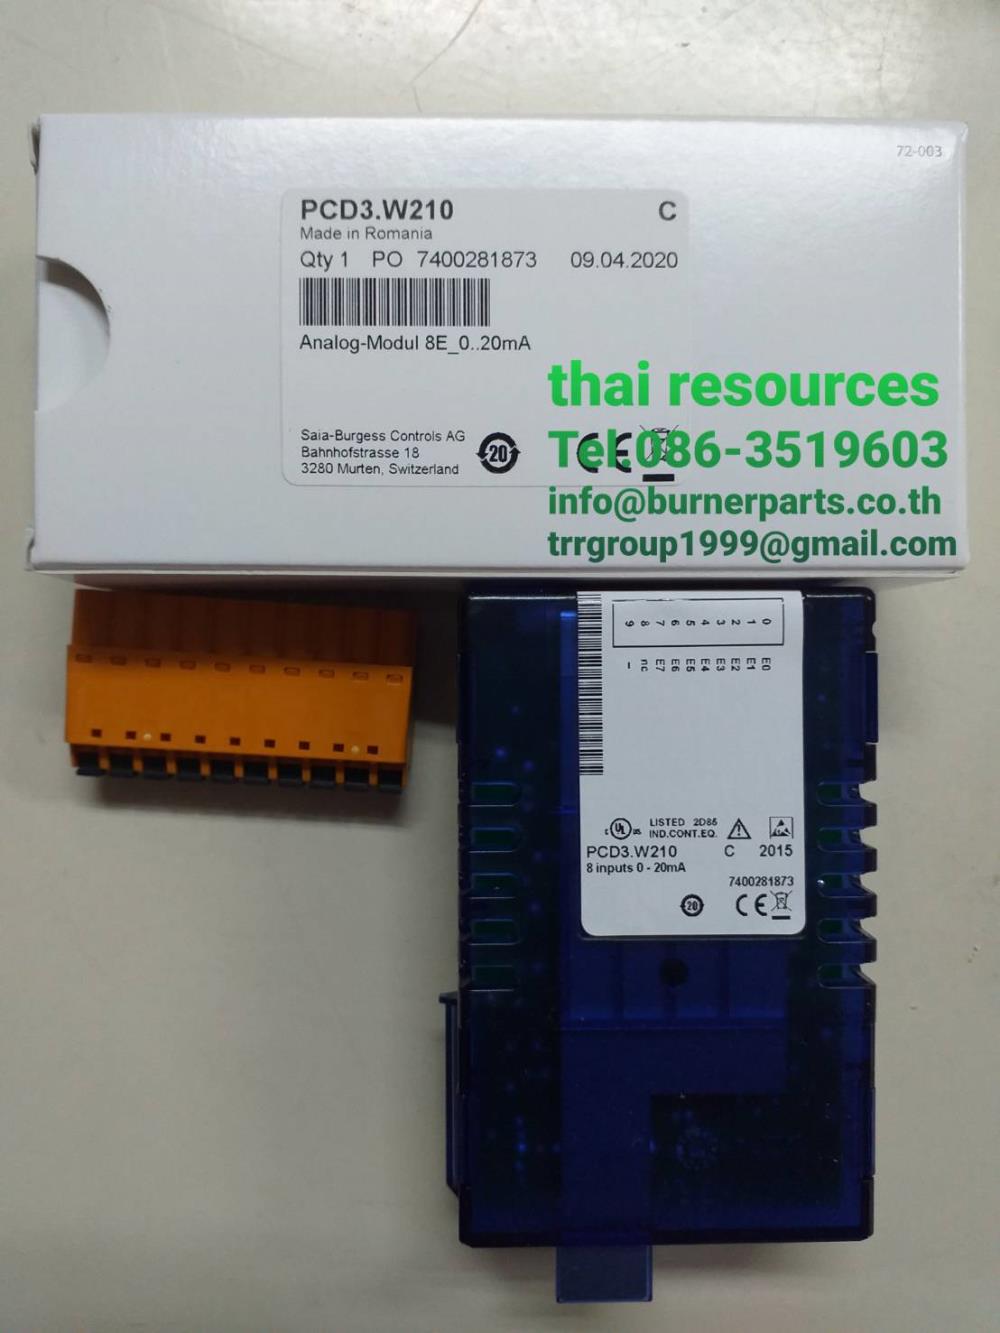 PCD3.W210 Analoge Eingangsmodule#PCD3.W210 Analoge Eingangsmodule,PCD3.W210 Analoge Eingangsmodule#PCD3.W210 Analoge Eingangsmodule,PCD3.W210 Analoge Eingangsmodule#PCD3.W210 Analoge Eingangsmodule,Electrical and Power Generation/Electrical Components/Electrical contact